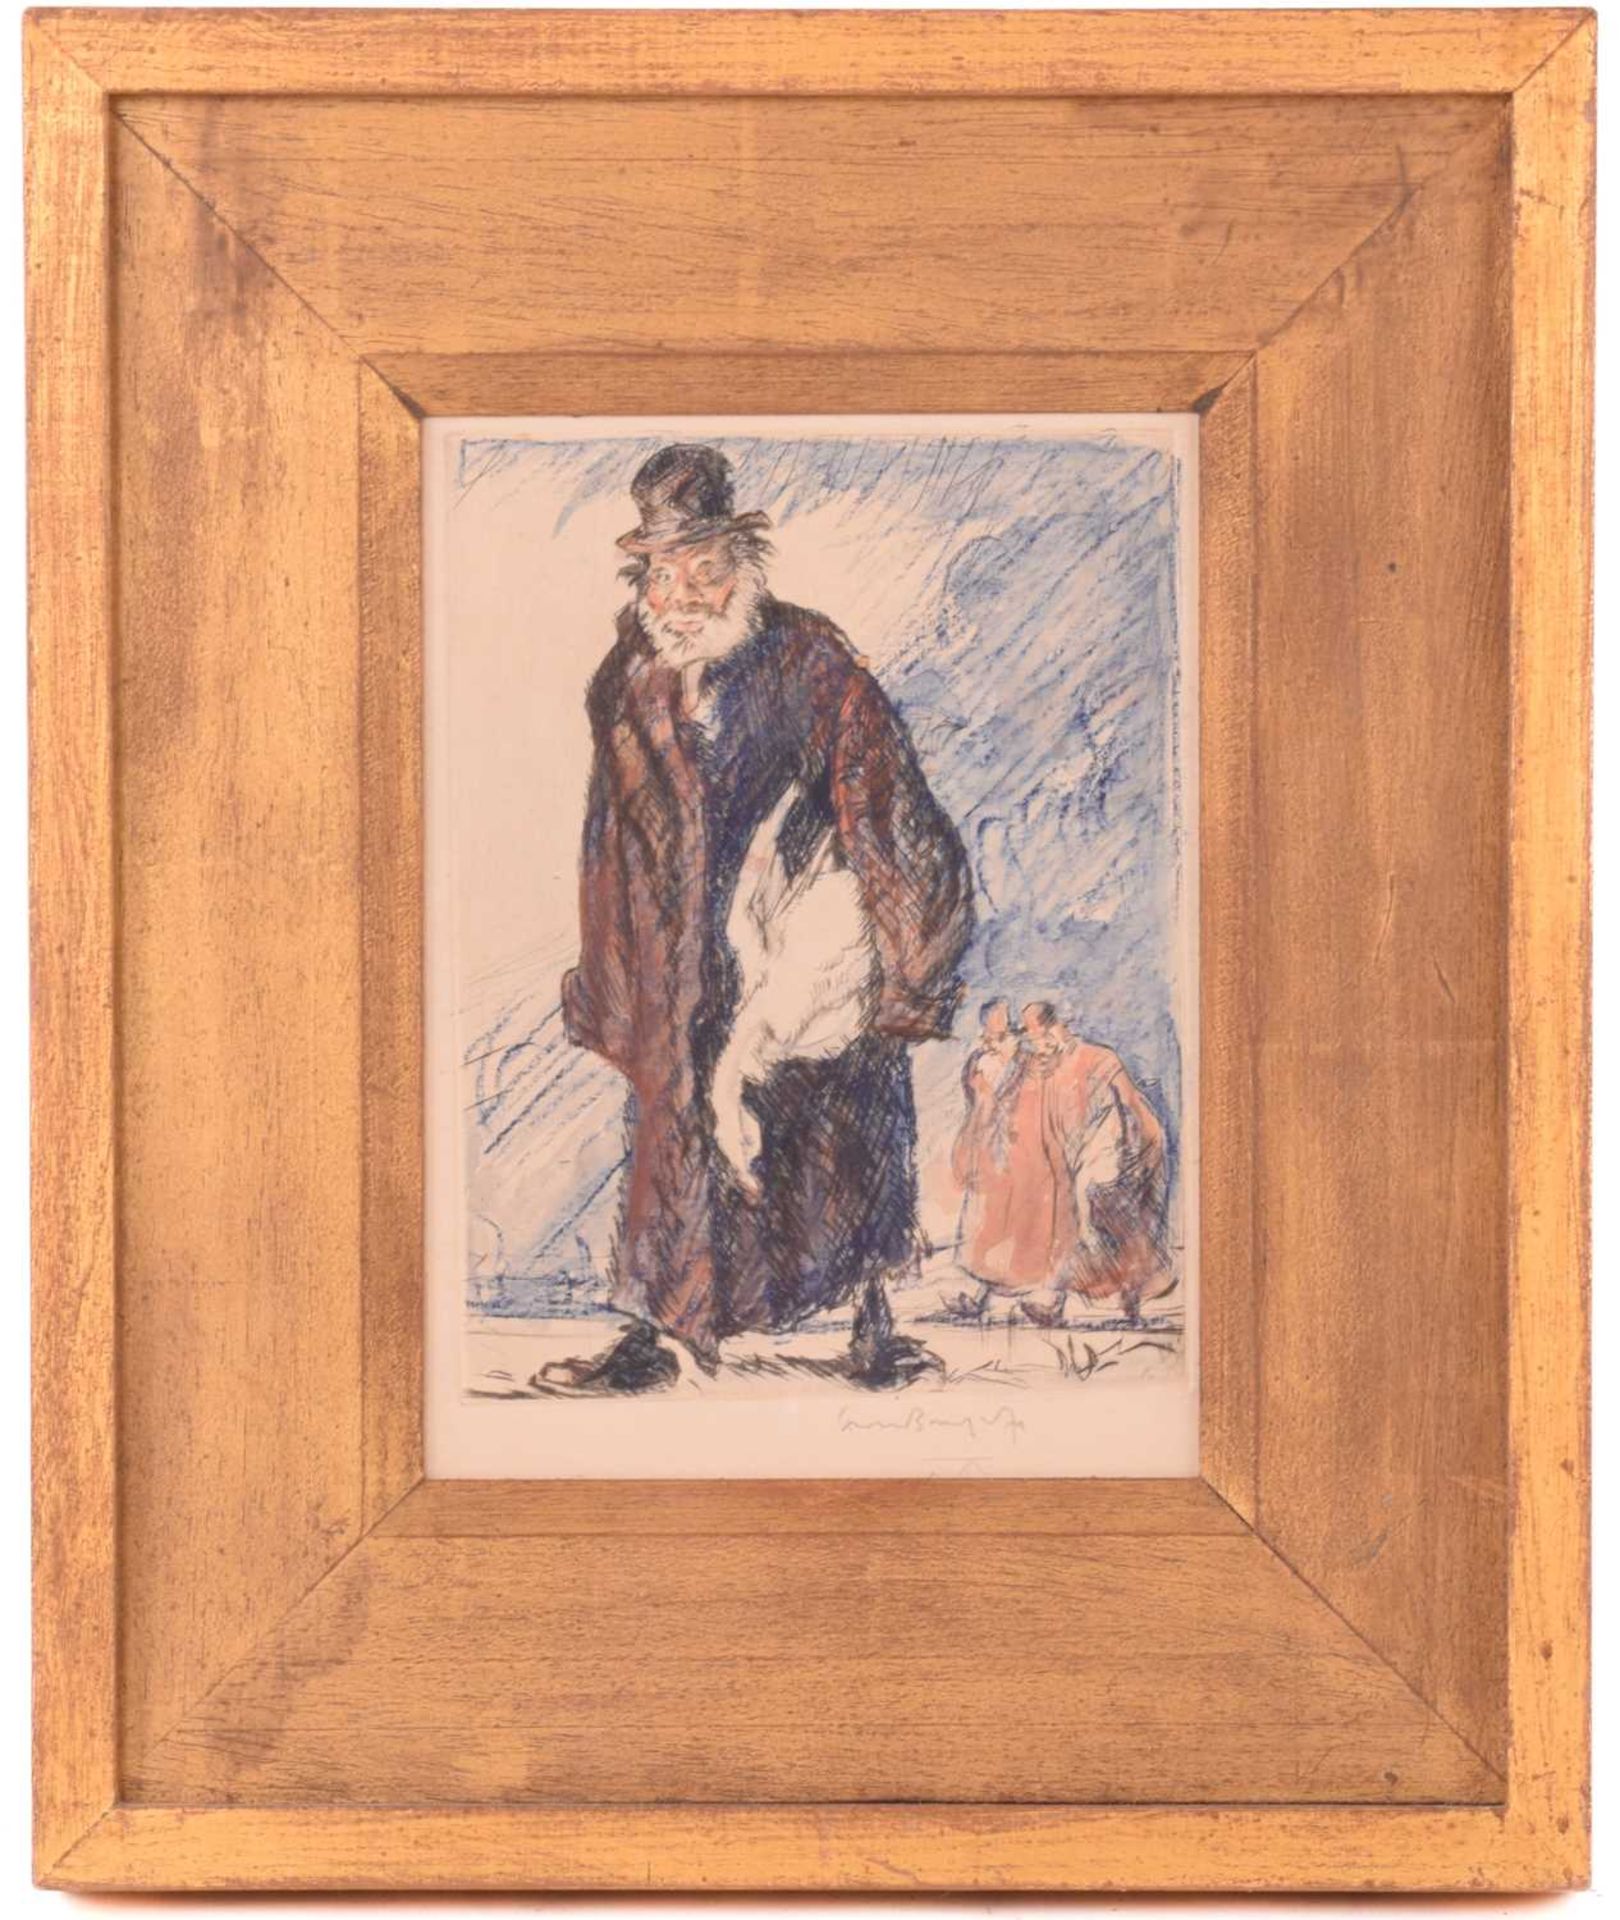 Frank Brangwyn (1867 - 1956), 'Bringing home the Christmas Goose', signed in pencil, etching, pastel - Image 19 of 25